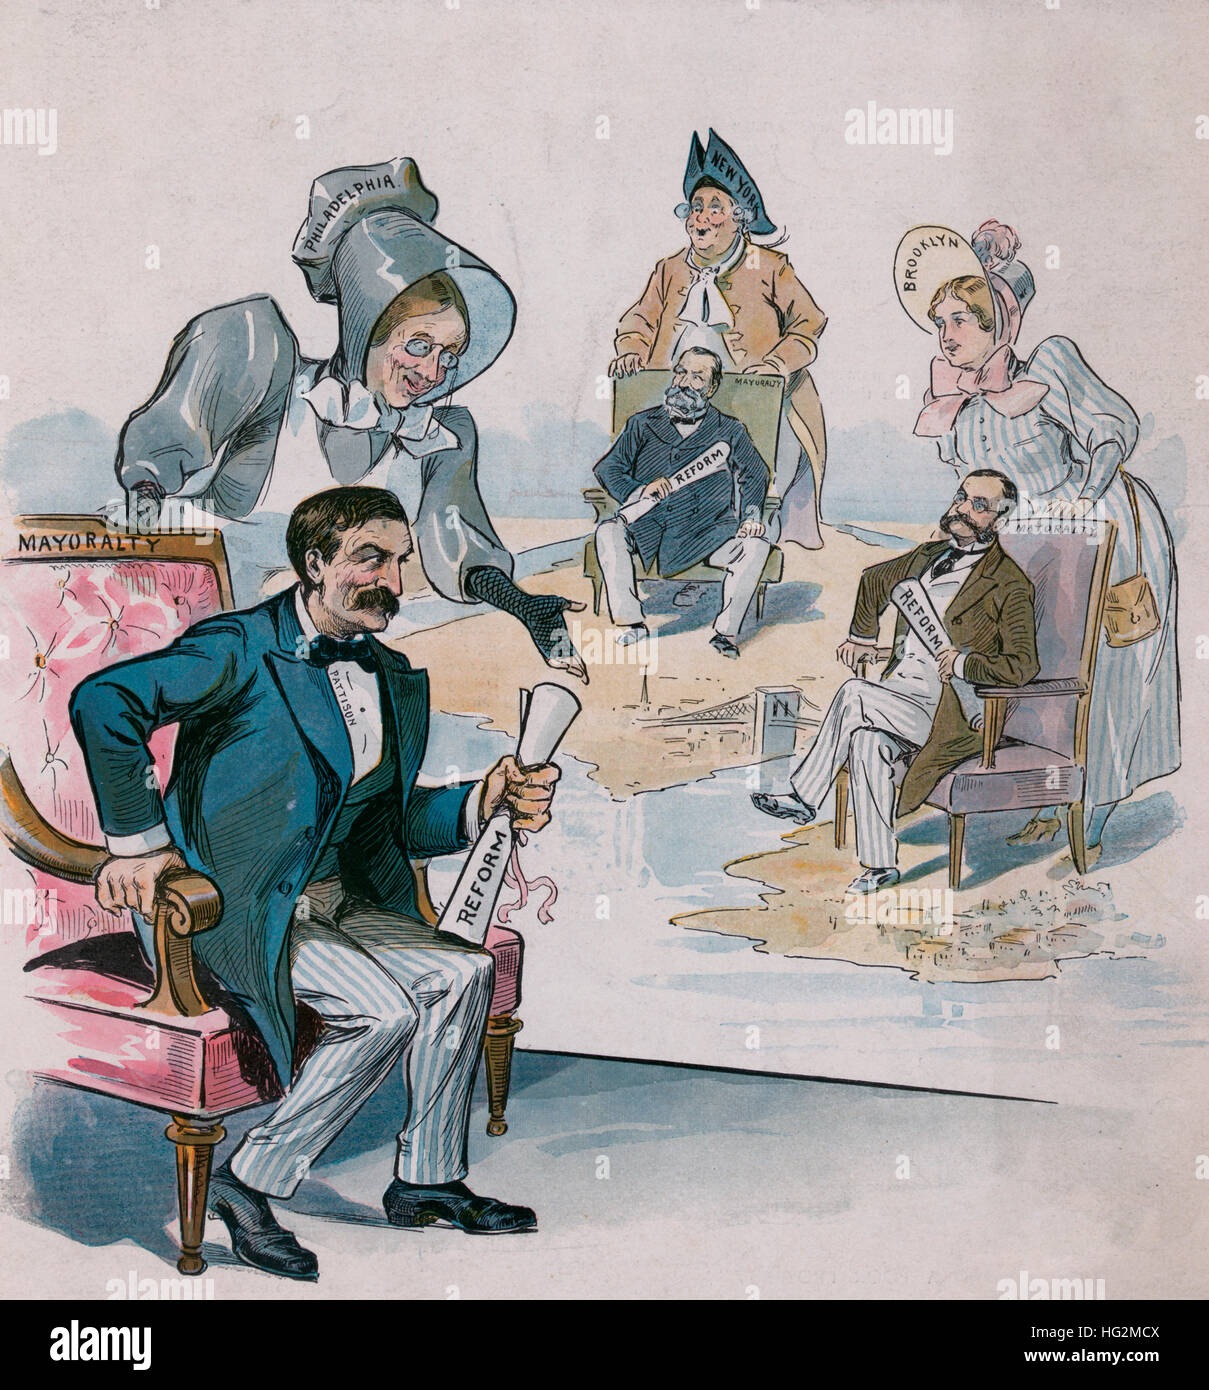 Hoping that Philadelphia will follow the good example of Brooklyn and New York.  Print shows Robert E. Pattison sitting in a chair labeled 'Mayoralty' with a woman labeled 'Philadelphia' standing behind him, Charles A. Schieren sitting in a chair labeled 'Mayoralty' with a woman labeled 'Brooklyn' standing behind him, and William L. Strong sitting in a chair labeled 'Mayoralty' with Father Knickerbocker standing behind him; all are holding papers labeled 'Reform'. 1895 Stock Photo